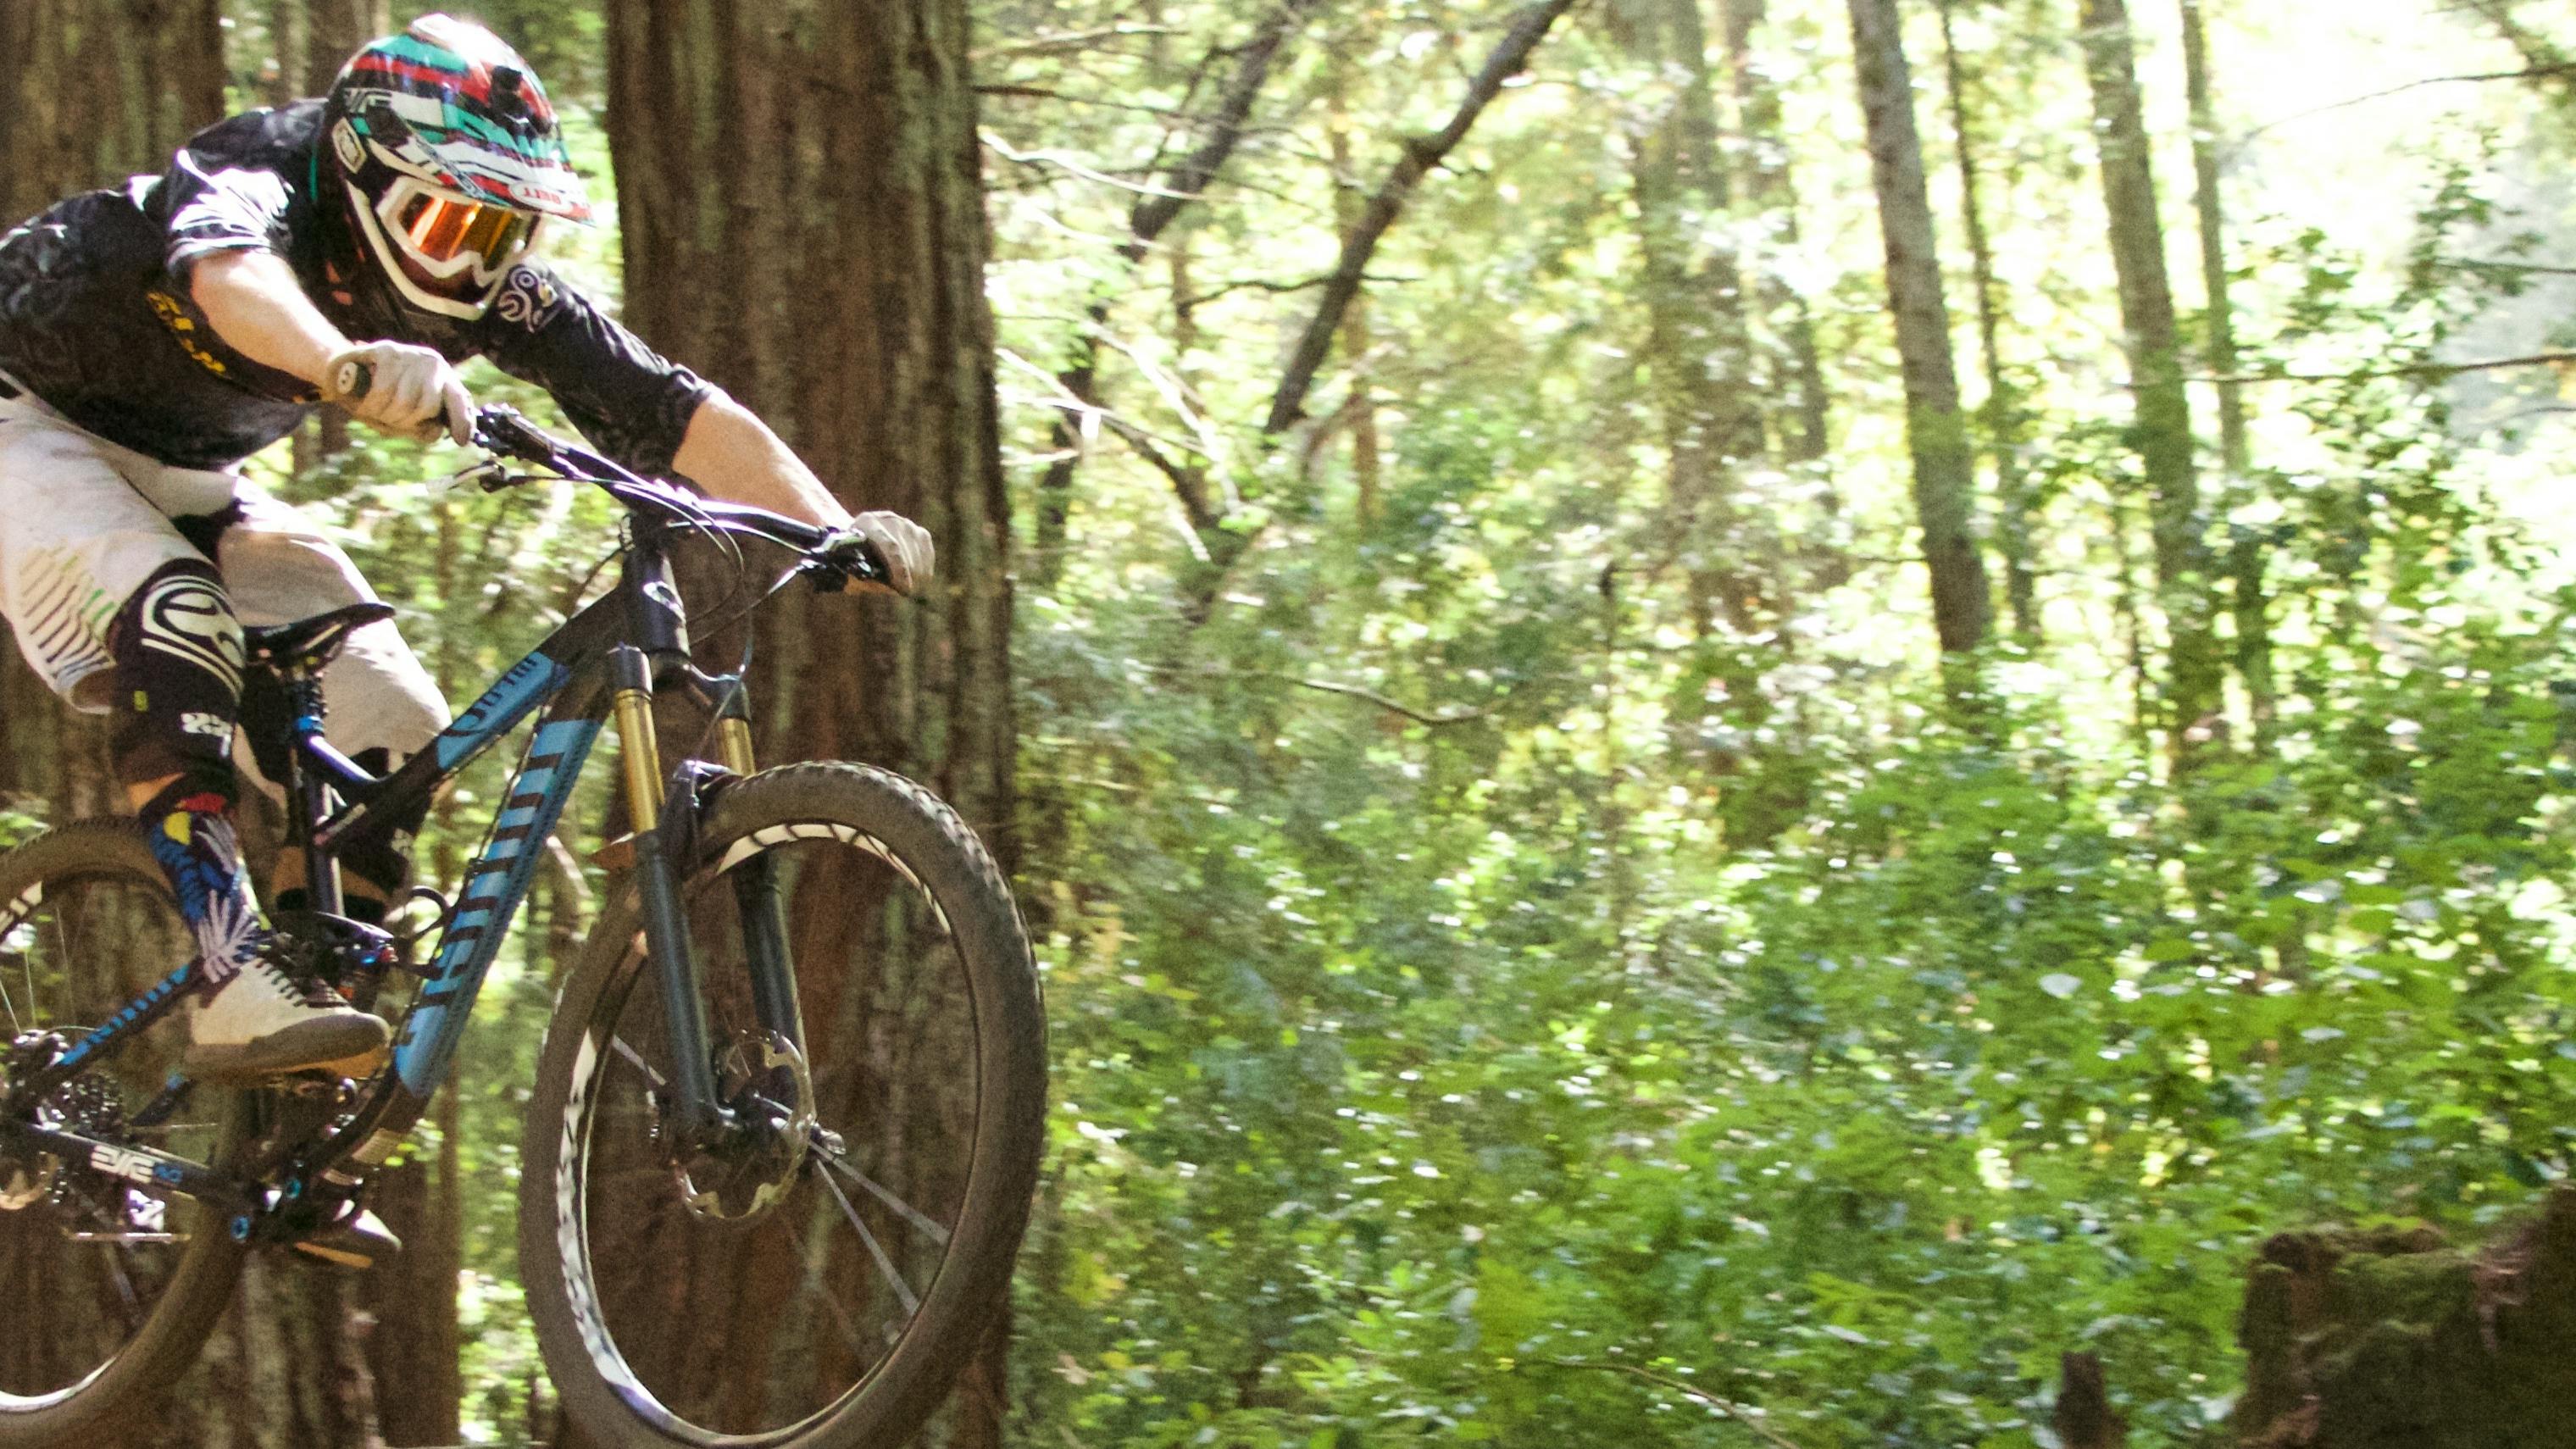 Curated expert Mitch Harnett airborne with his mountain bike in the forest in Santa Cruz, CA